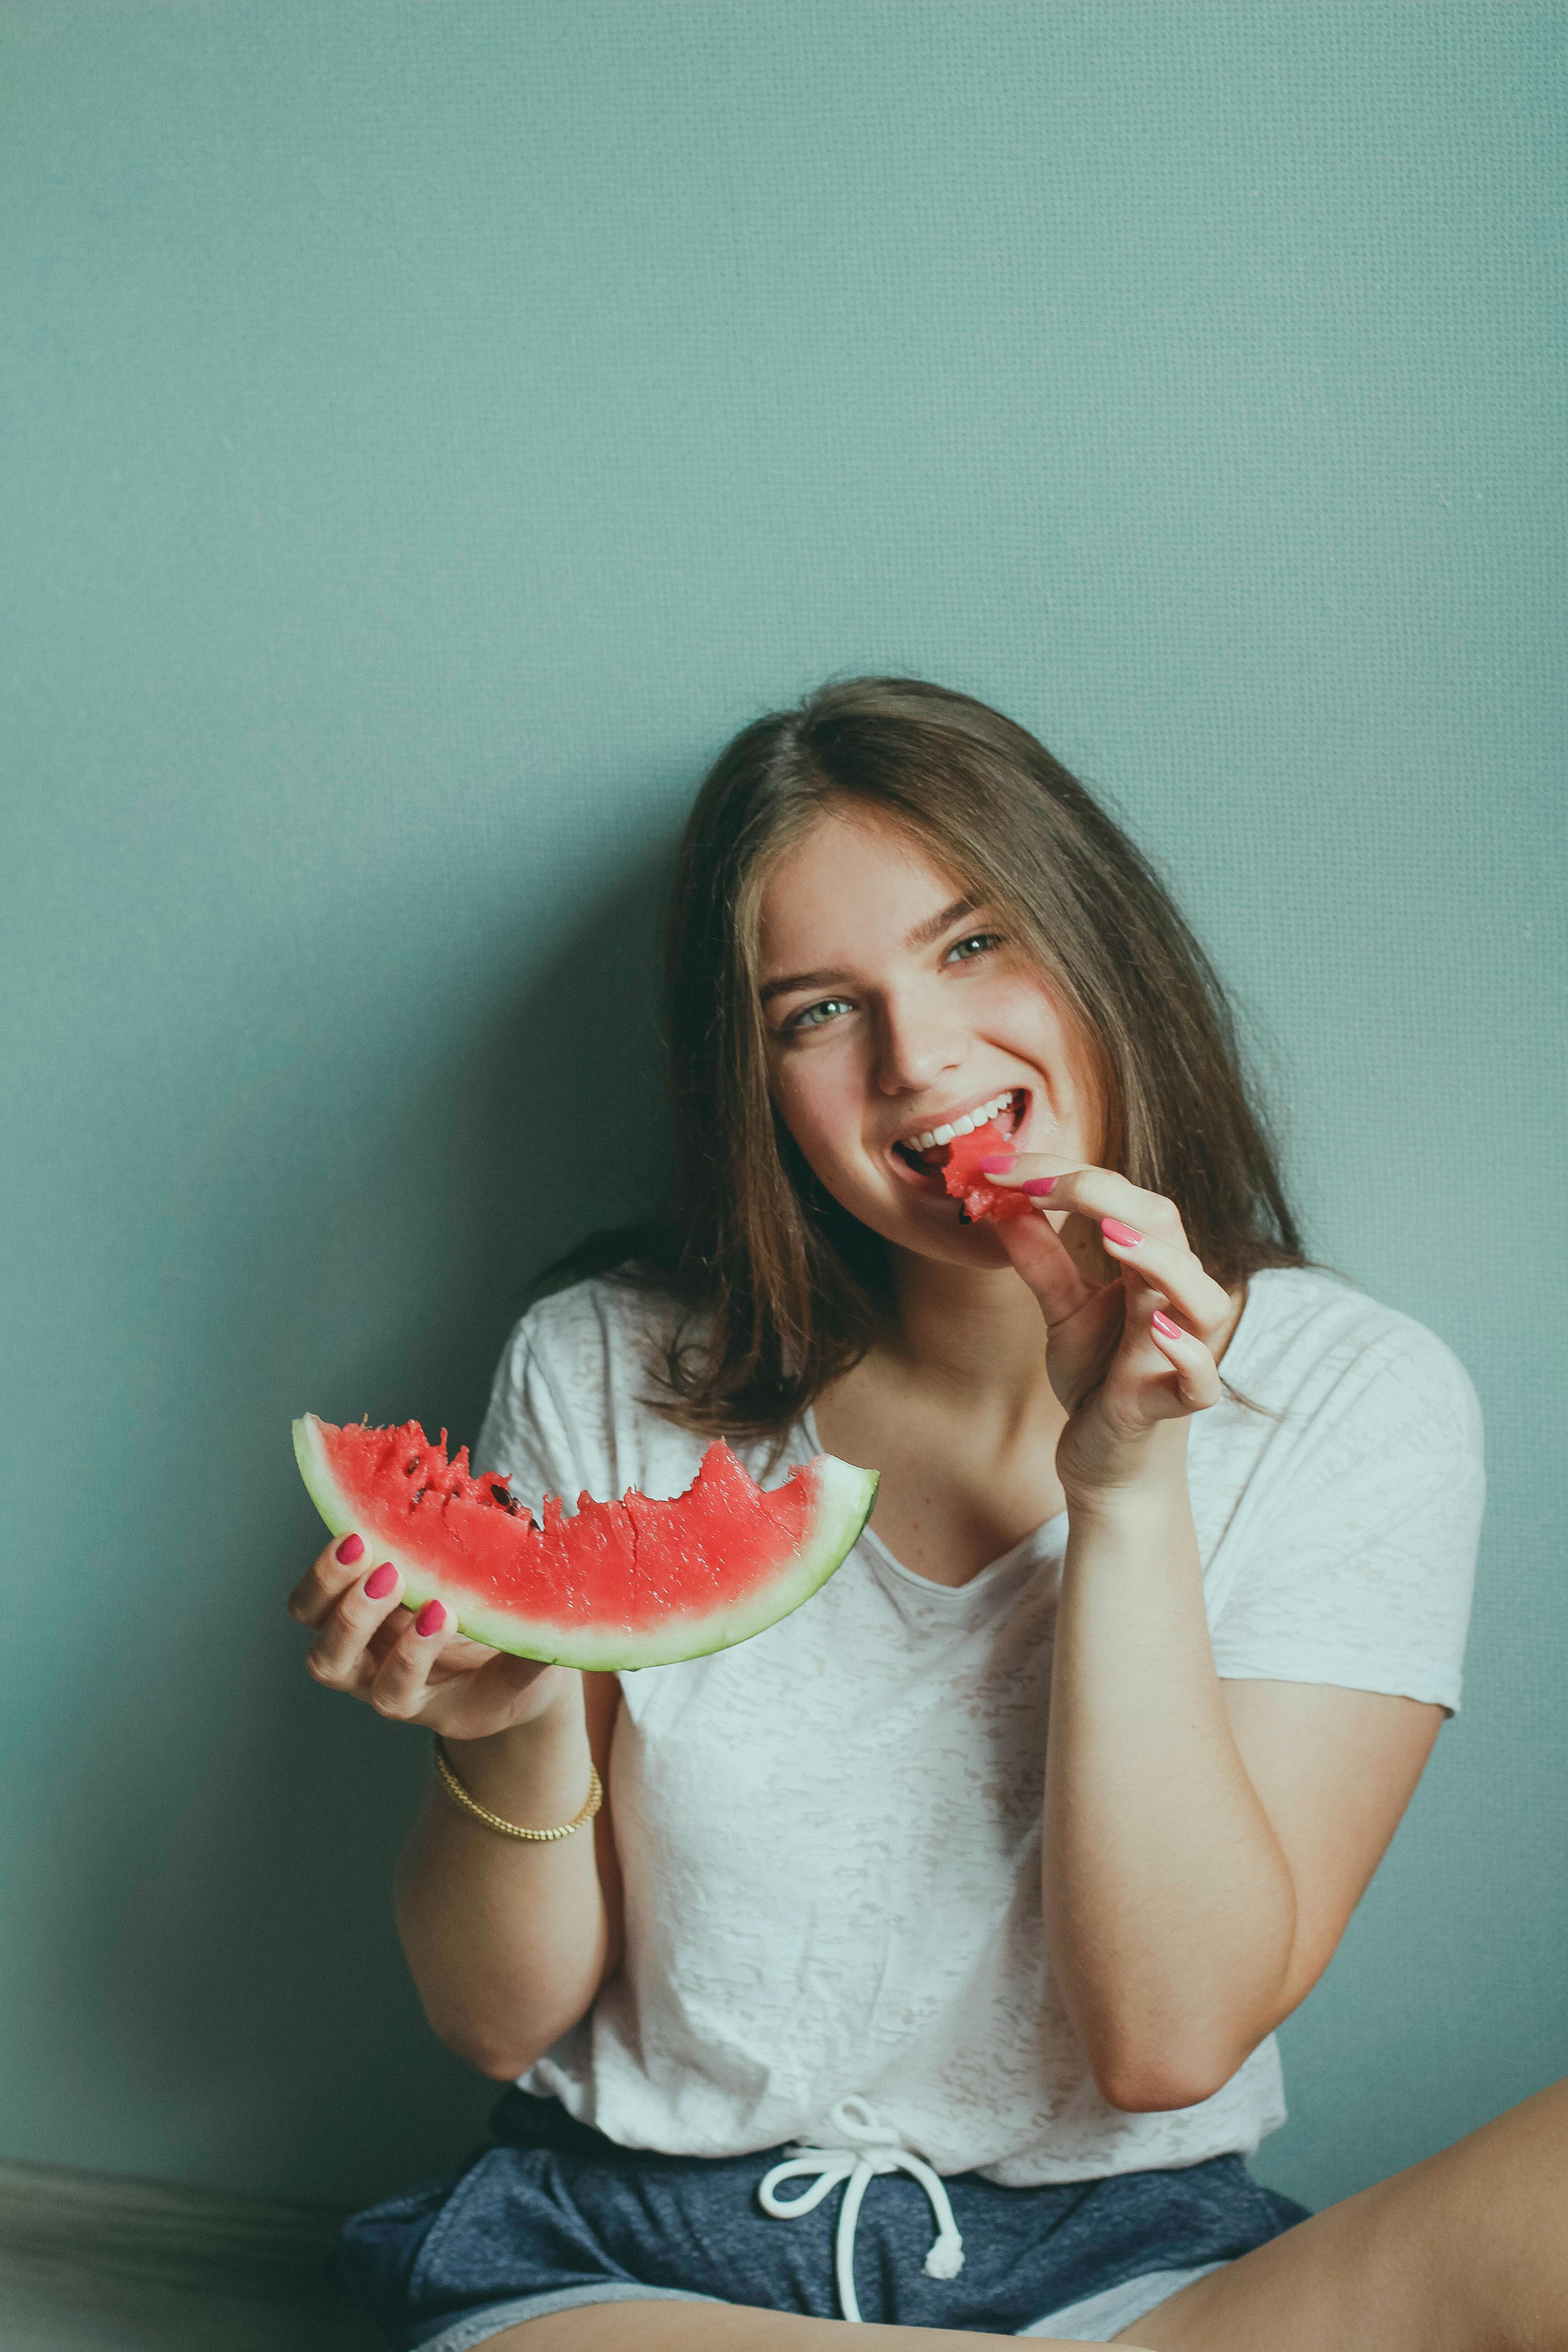 A girl eating watermelon | Source: Pexels